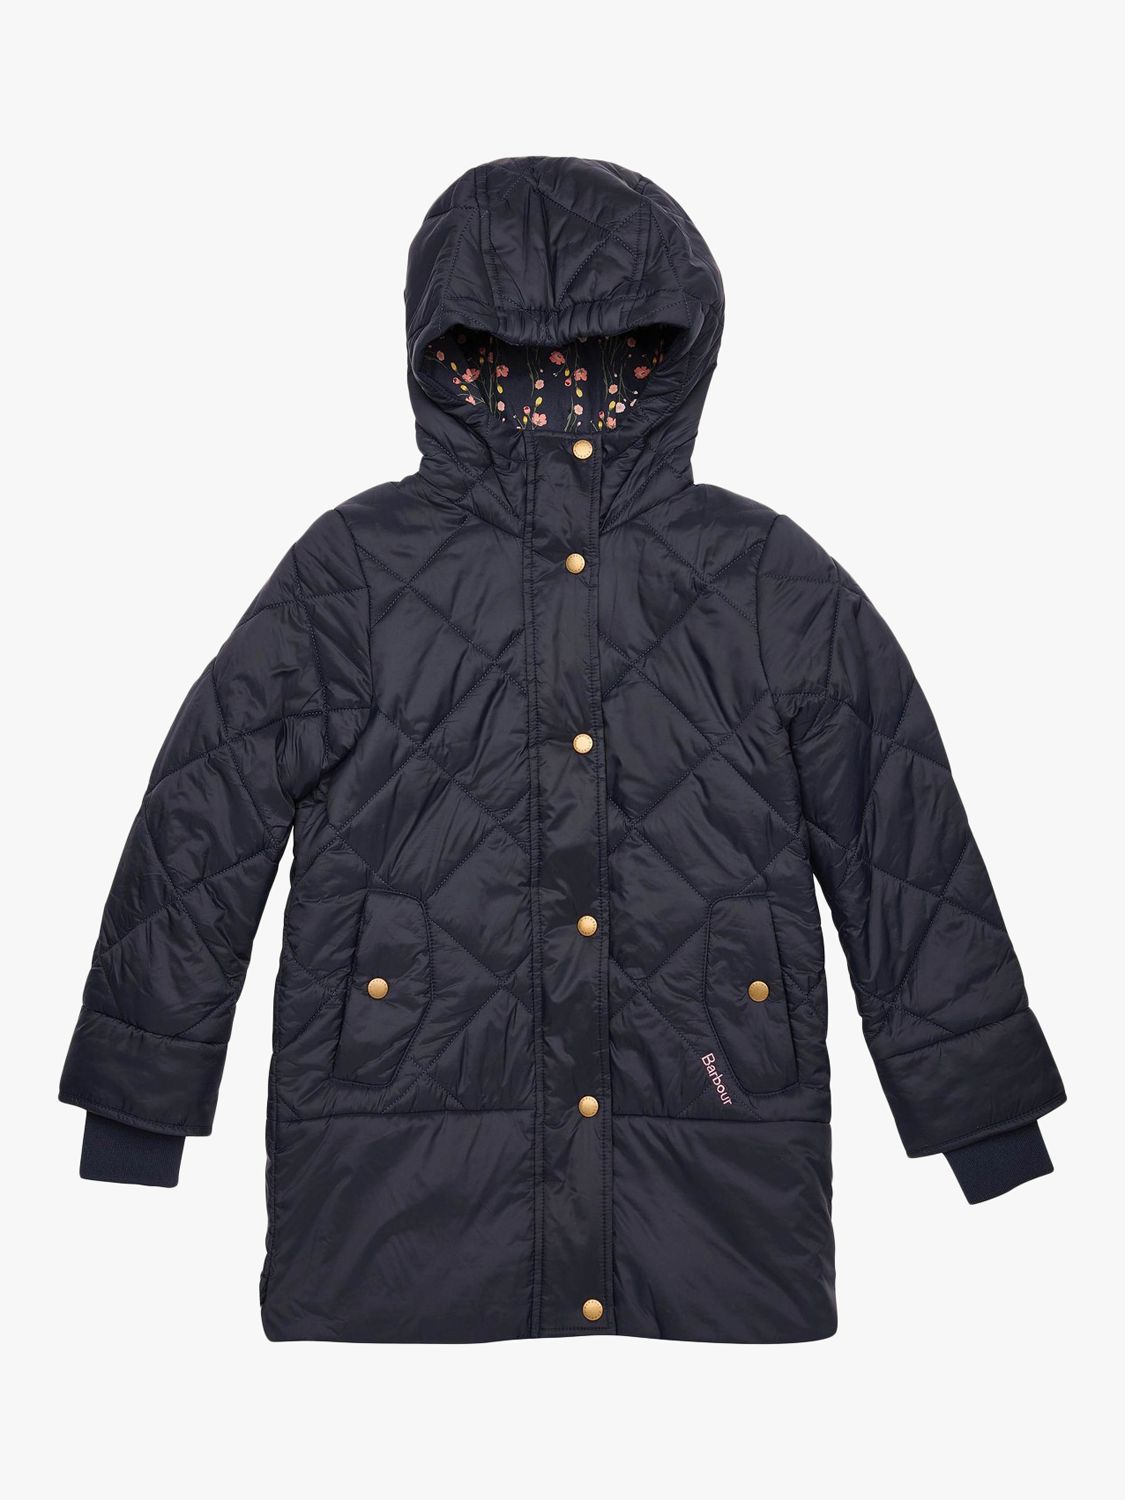 Barbour Kids' Tynemouth Quilted Jacket, Navy at John Lewis & Partners